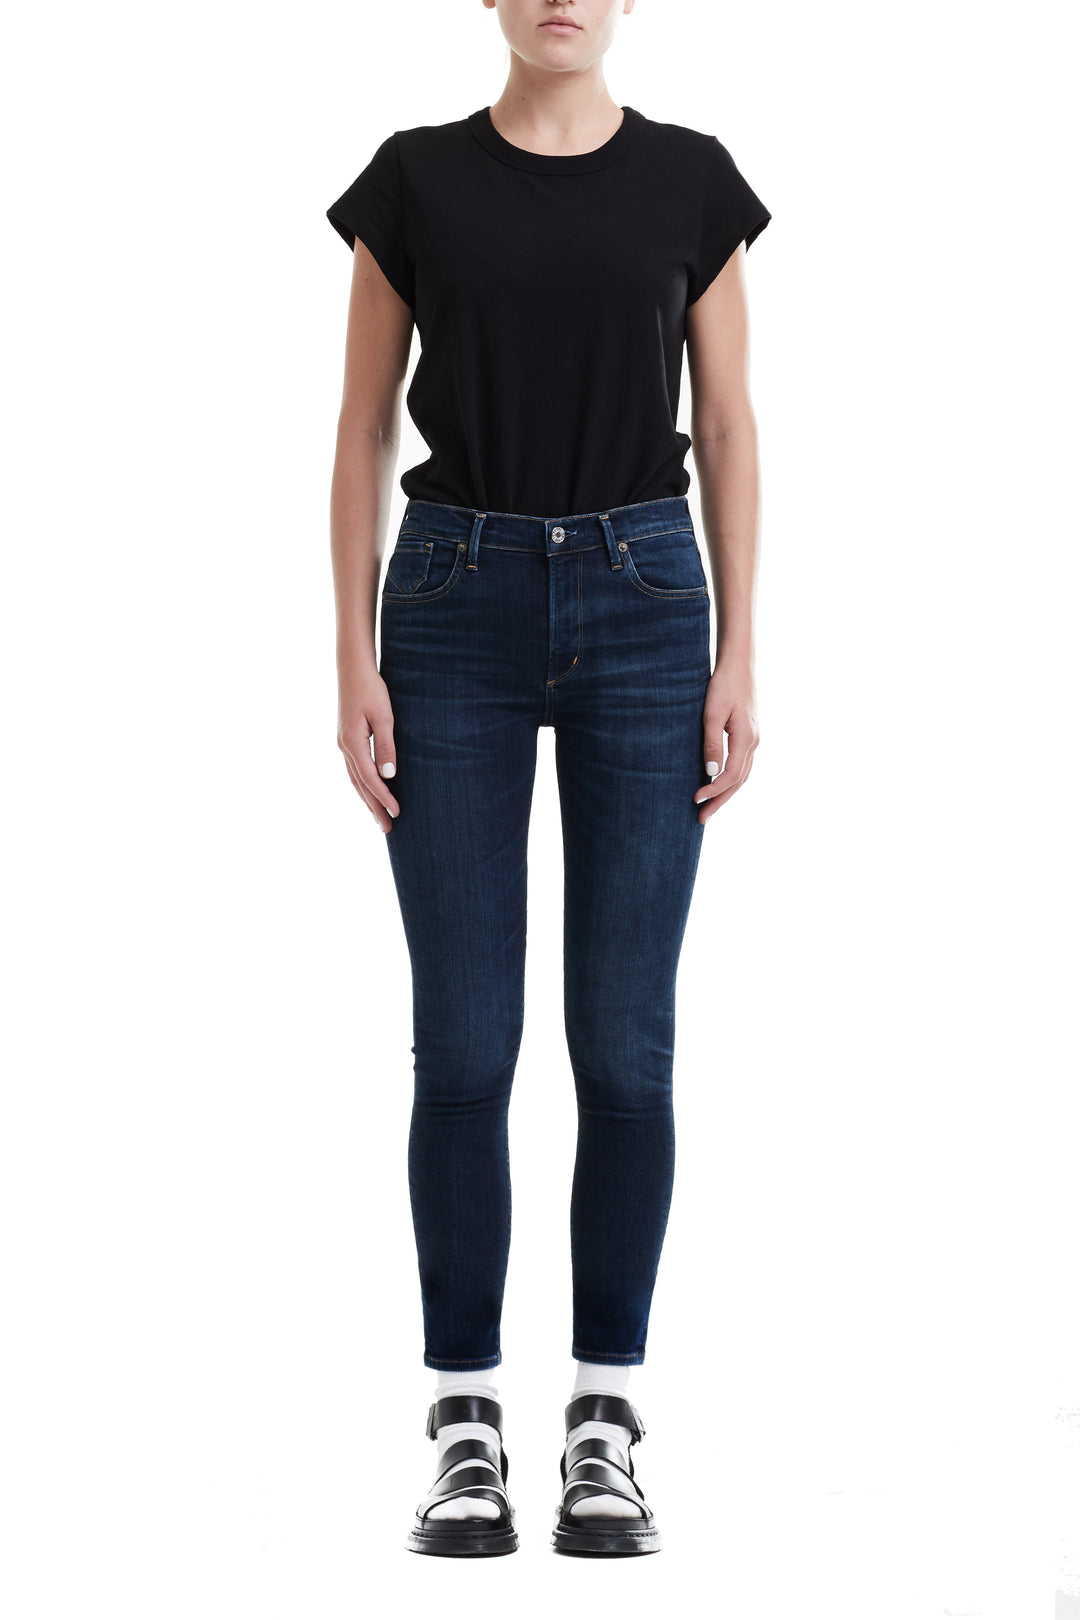 AGOLDE - Sophie Crop High Rise Skinny in Starland